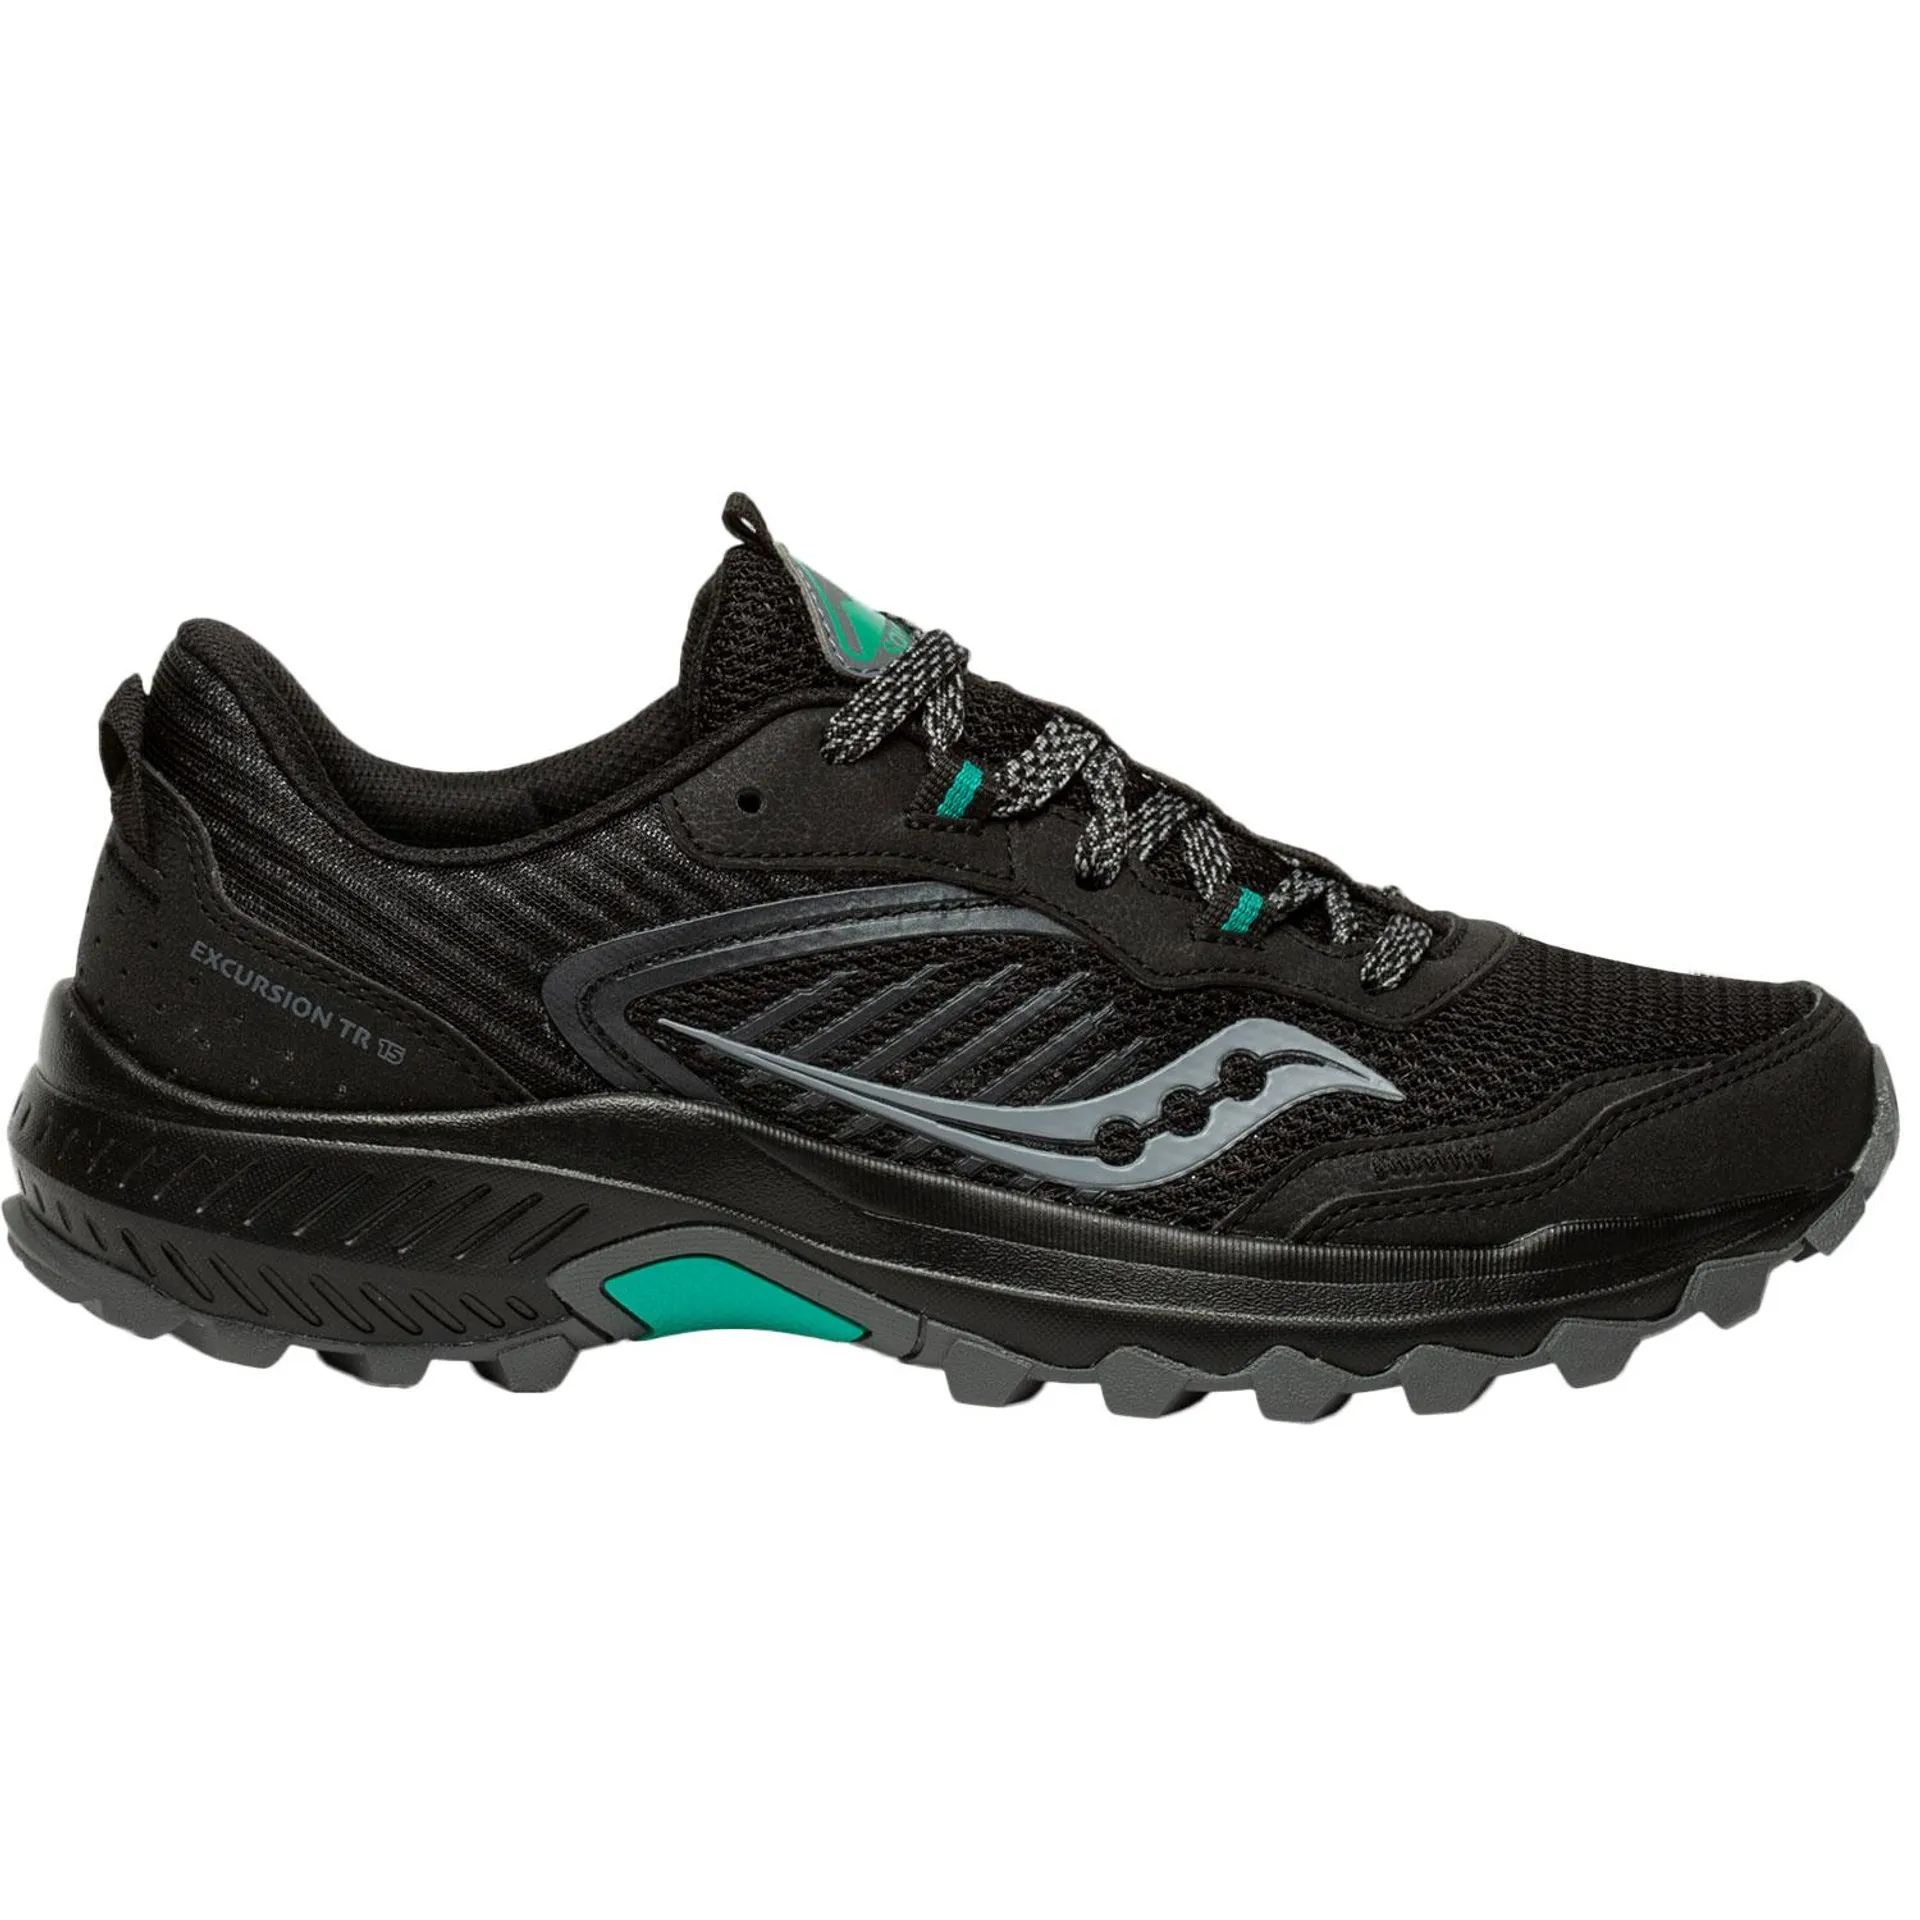 Saucony Excursion TR15 Women's Wide Running Shoes